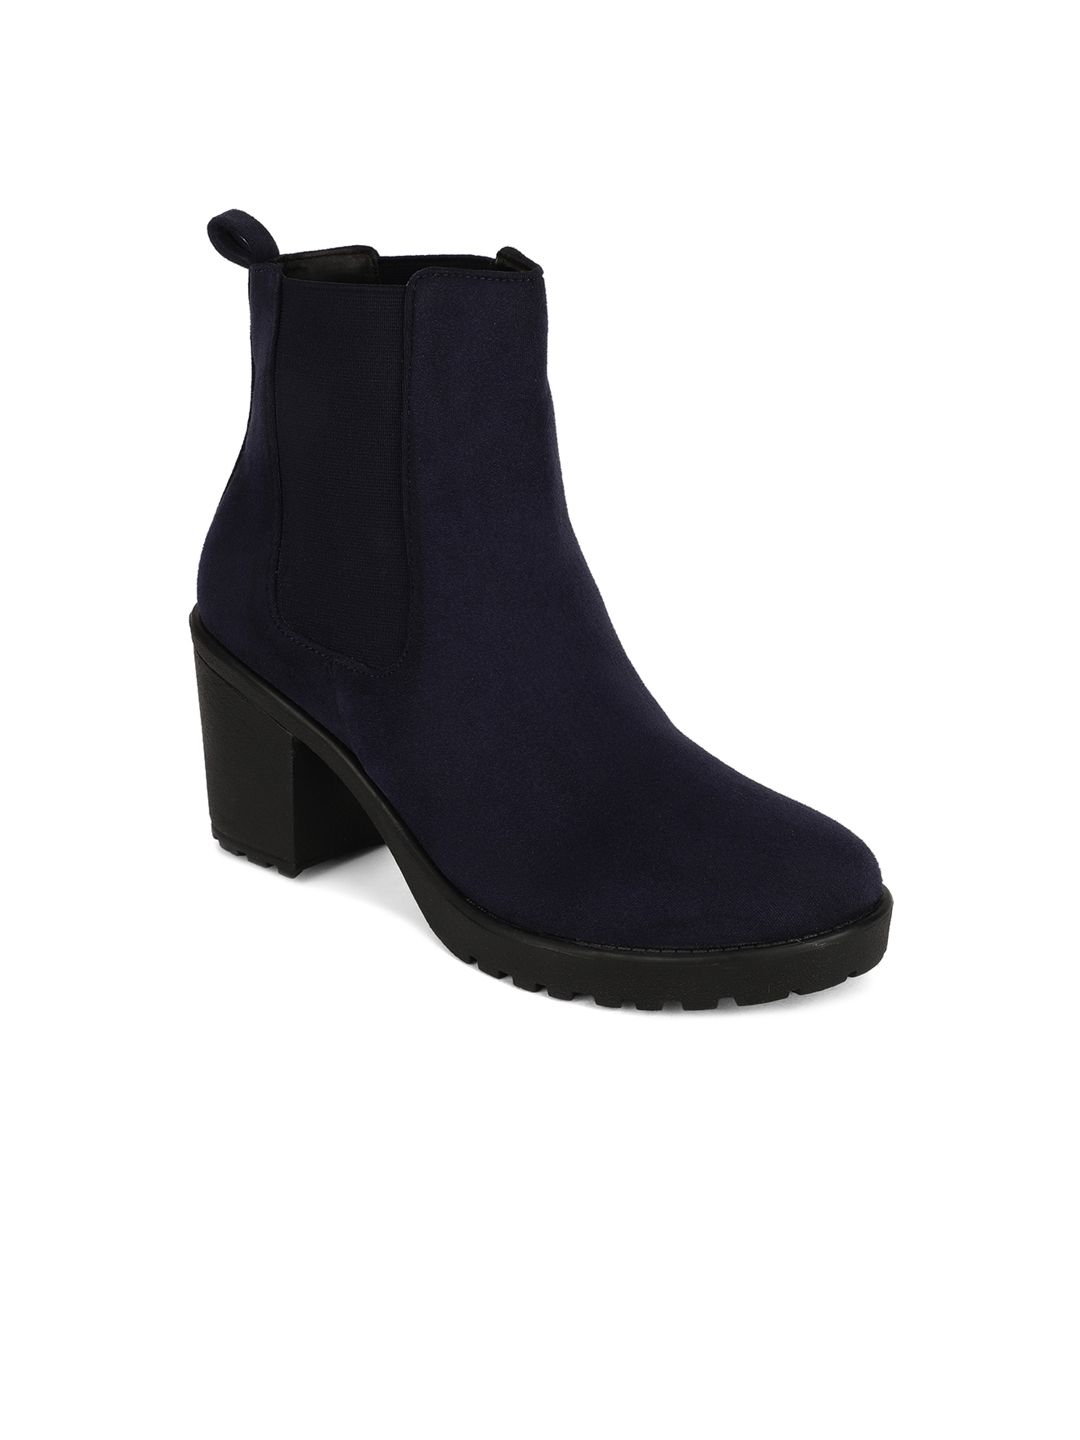 Bruno Manetti Woman Navy Blue Suede Block Heeled Boots Price in India